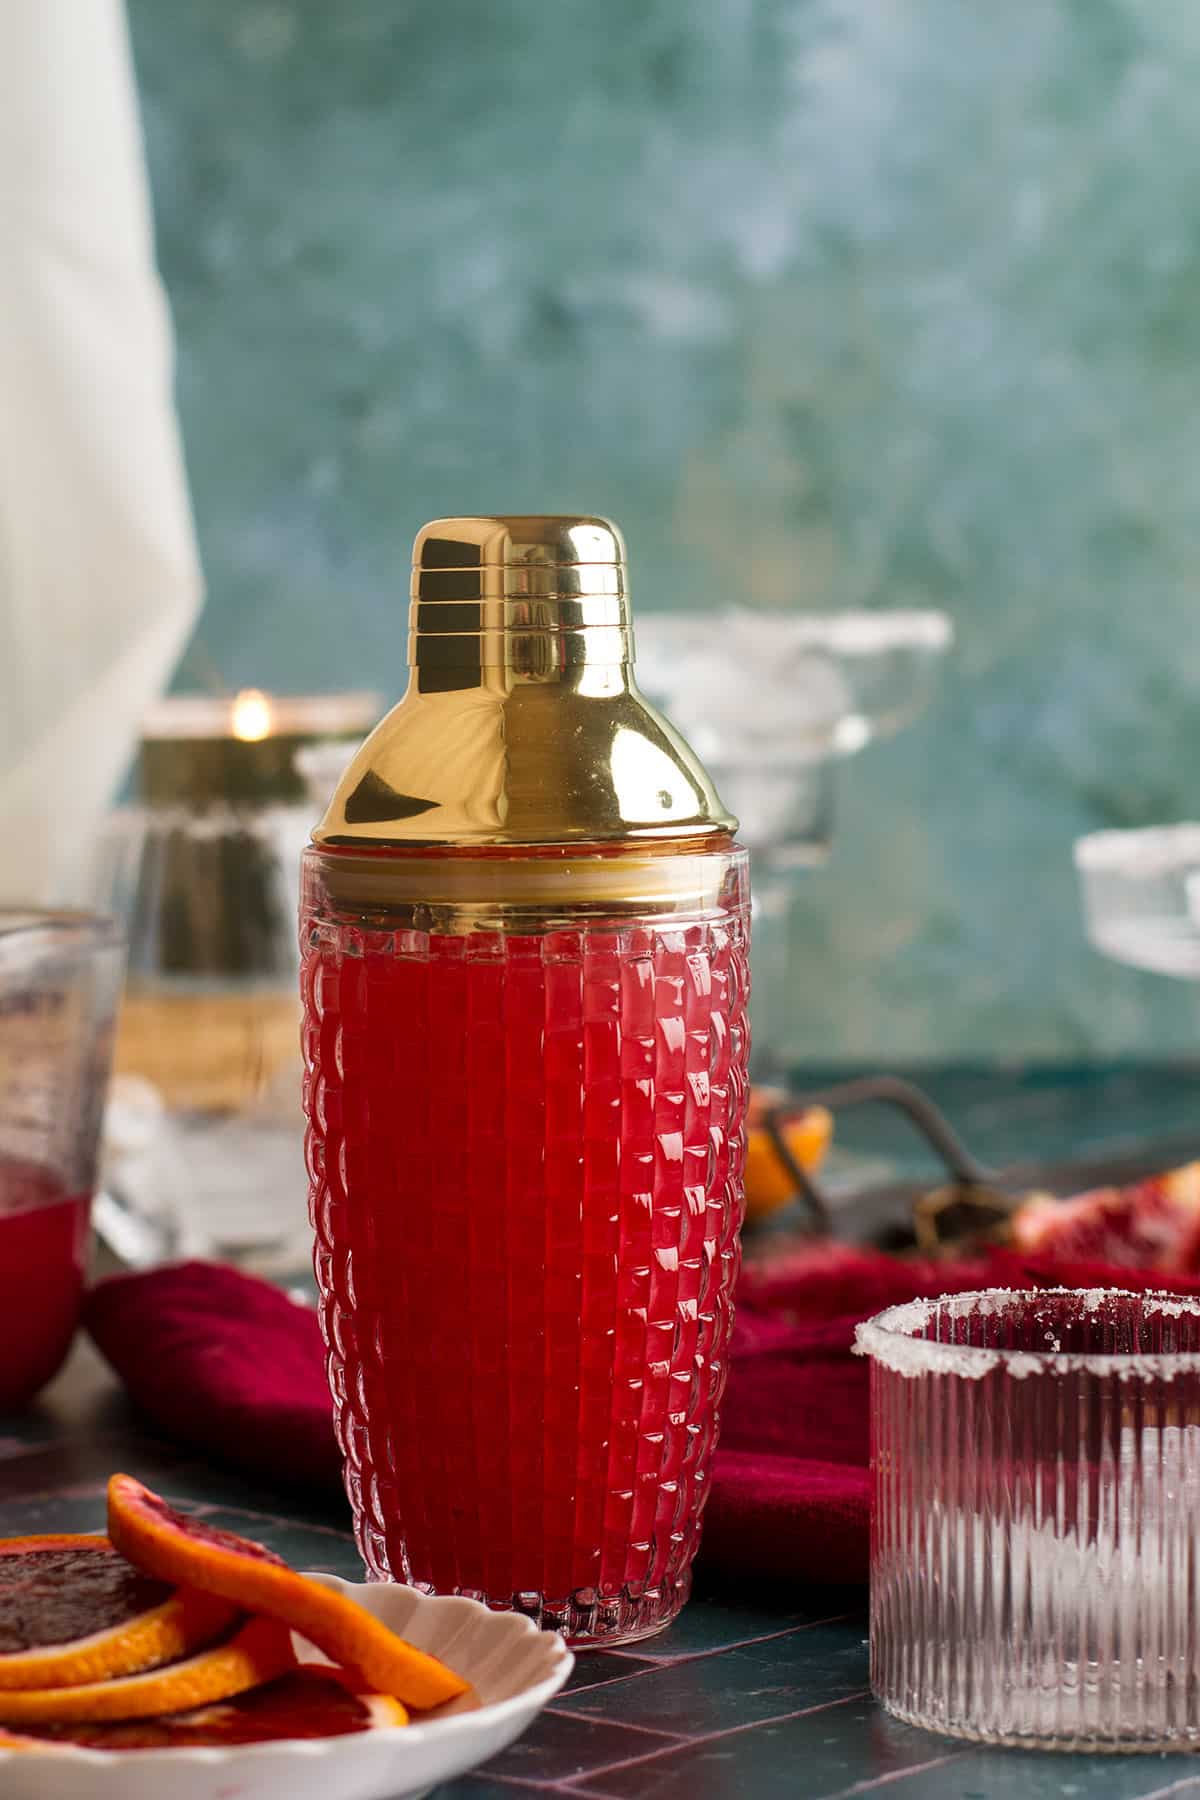 A bright red cocktail in a glass cocktail shaker.